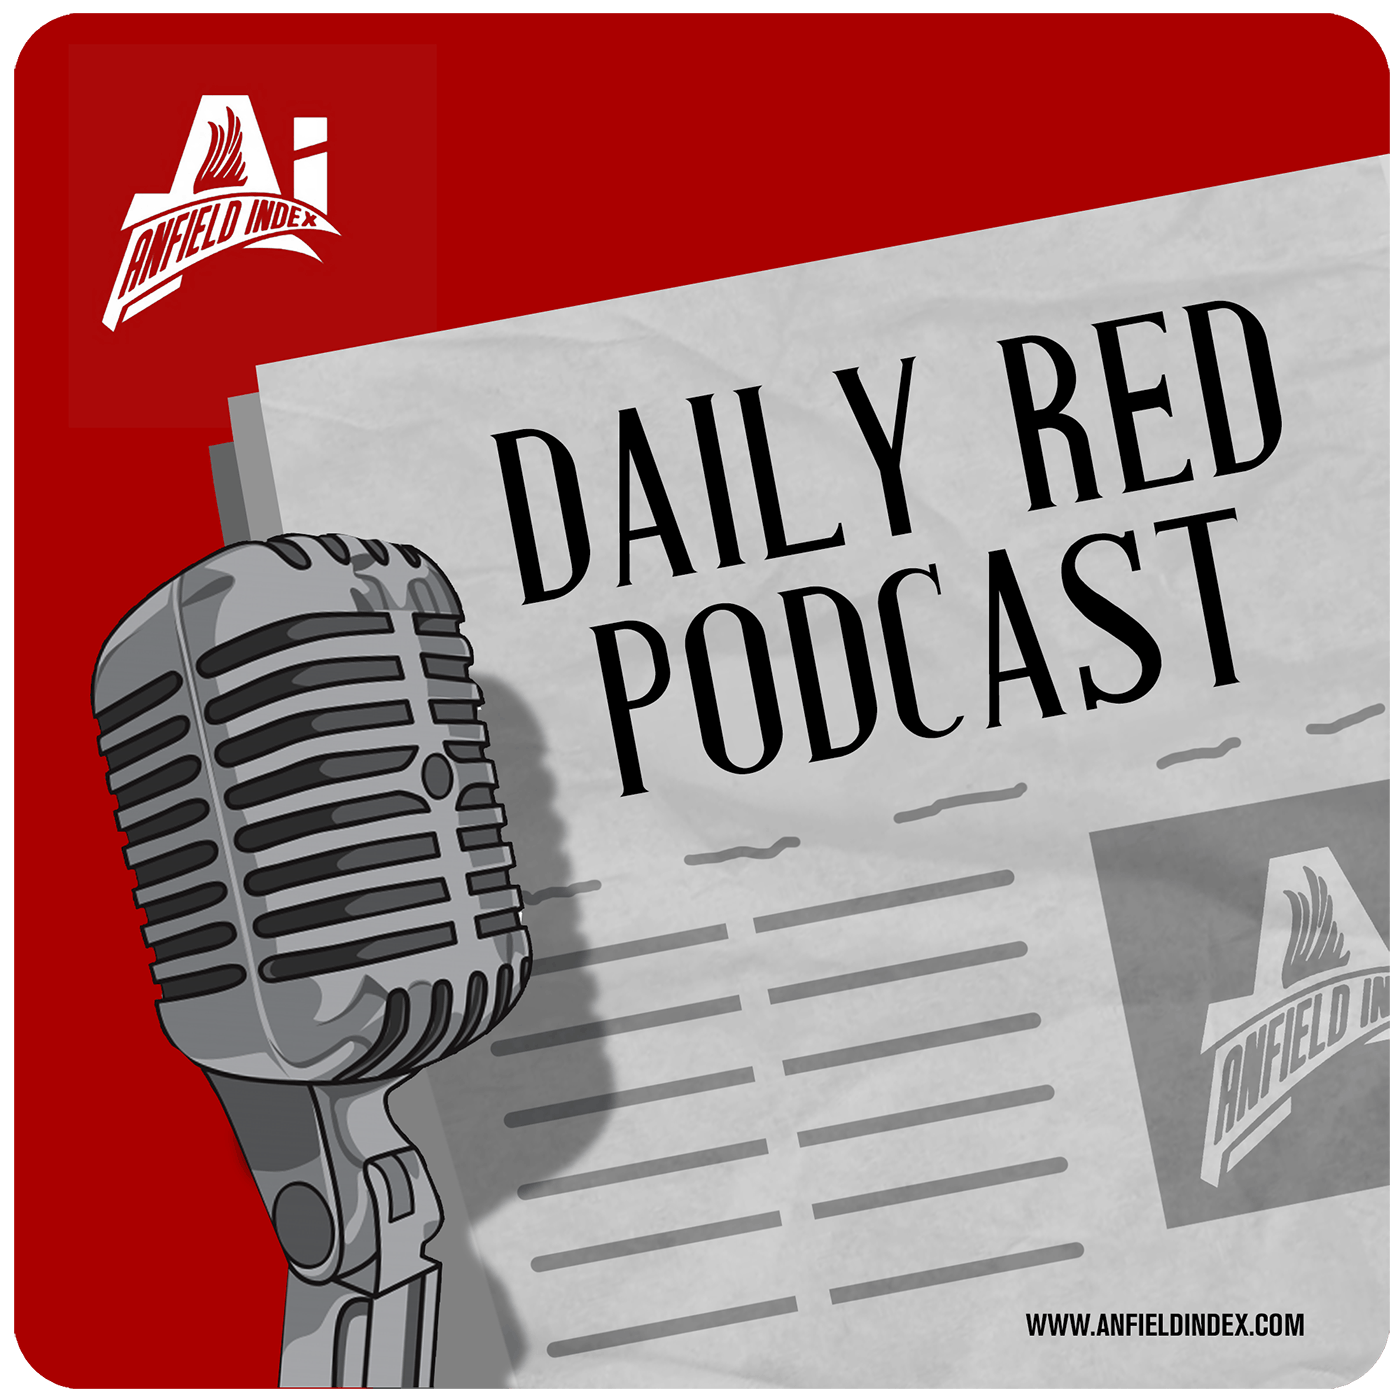 Multi Club Options: Daily Red Podcast